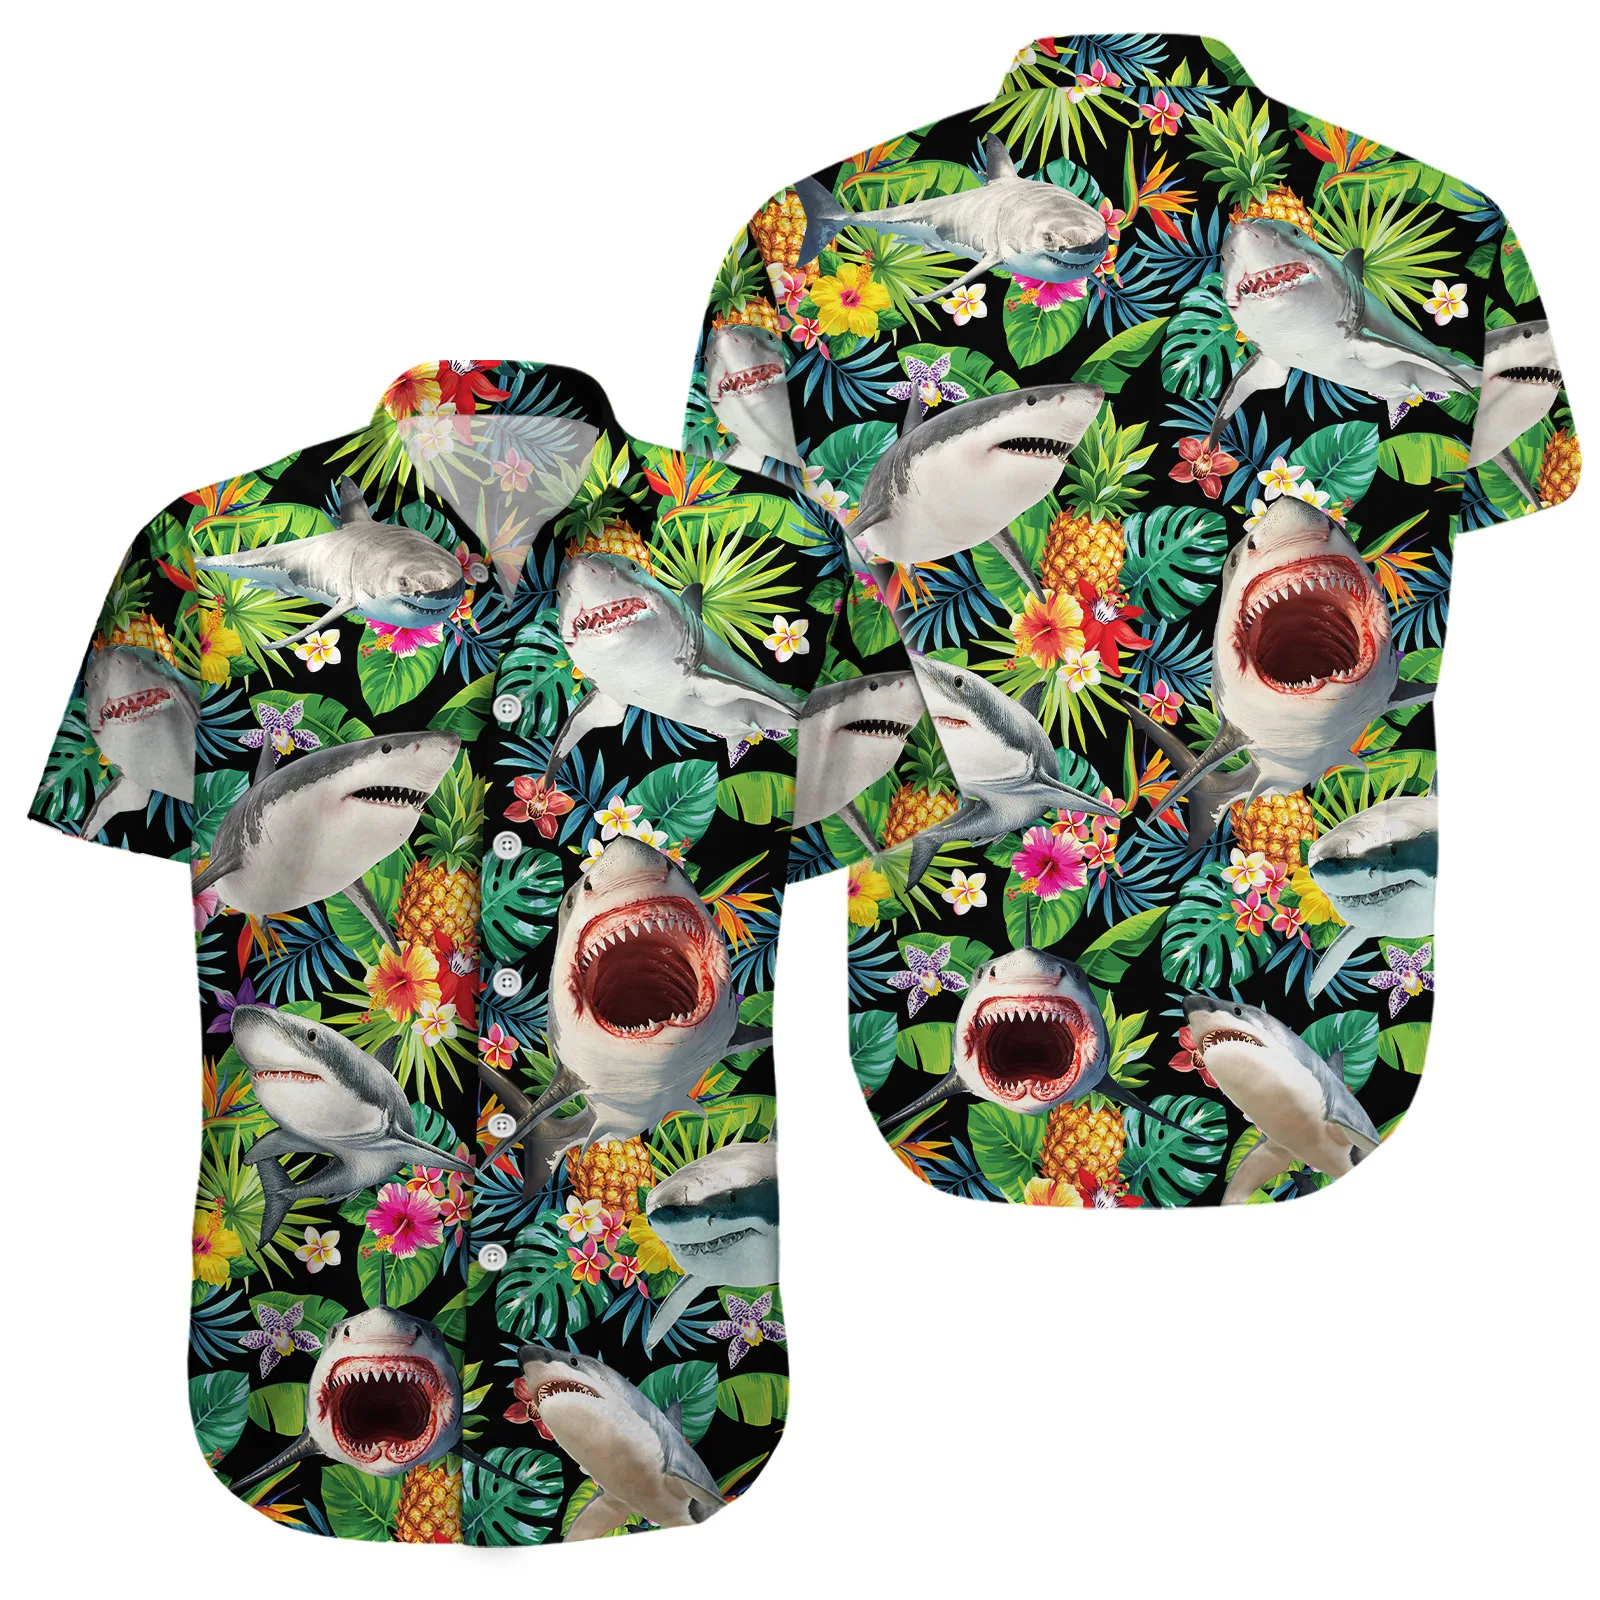 

Funny Shark Pineapple Tropical Hawaiian Palm Trees Shirt, Casual Button Down Short Sleeve Shirt, Holiday Party Outfits